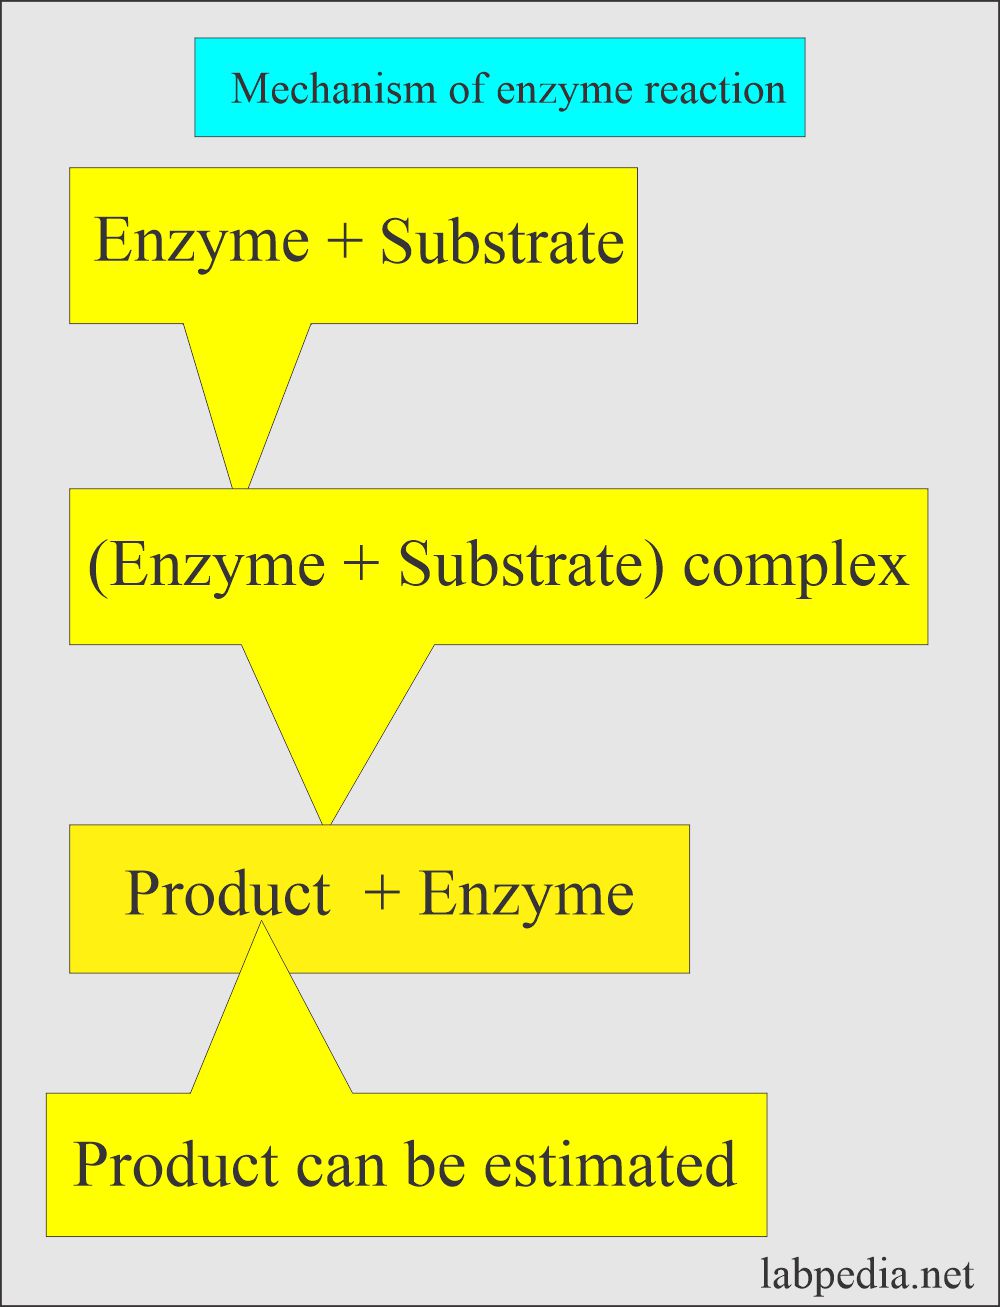 Enzyme reaction and measurement of end product